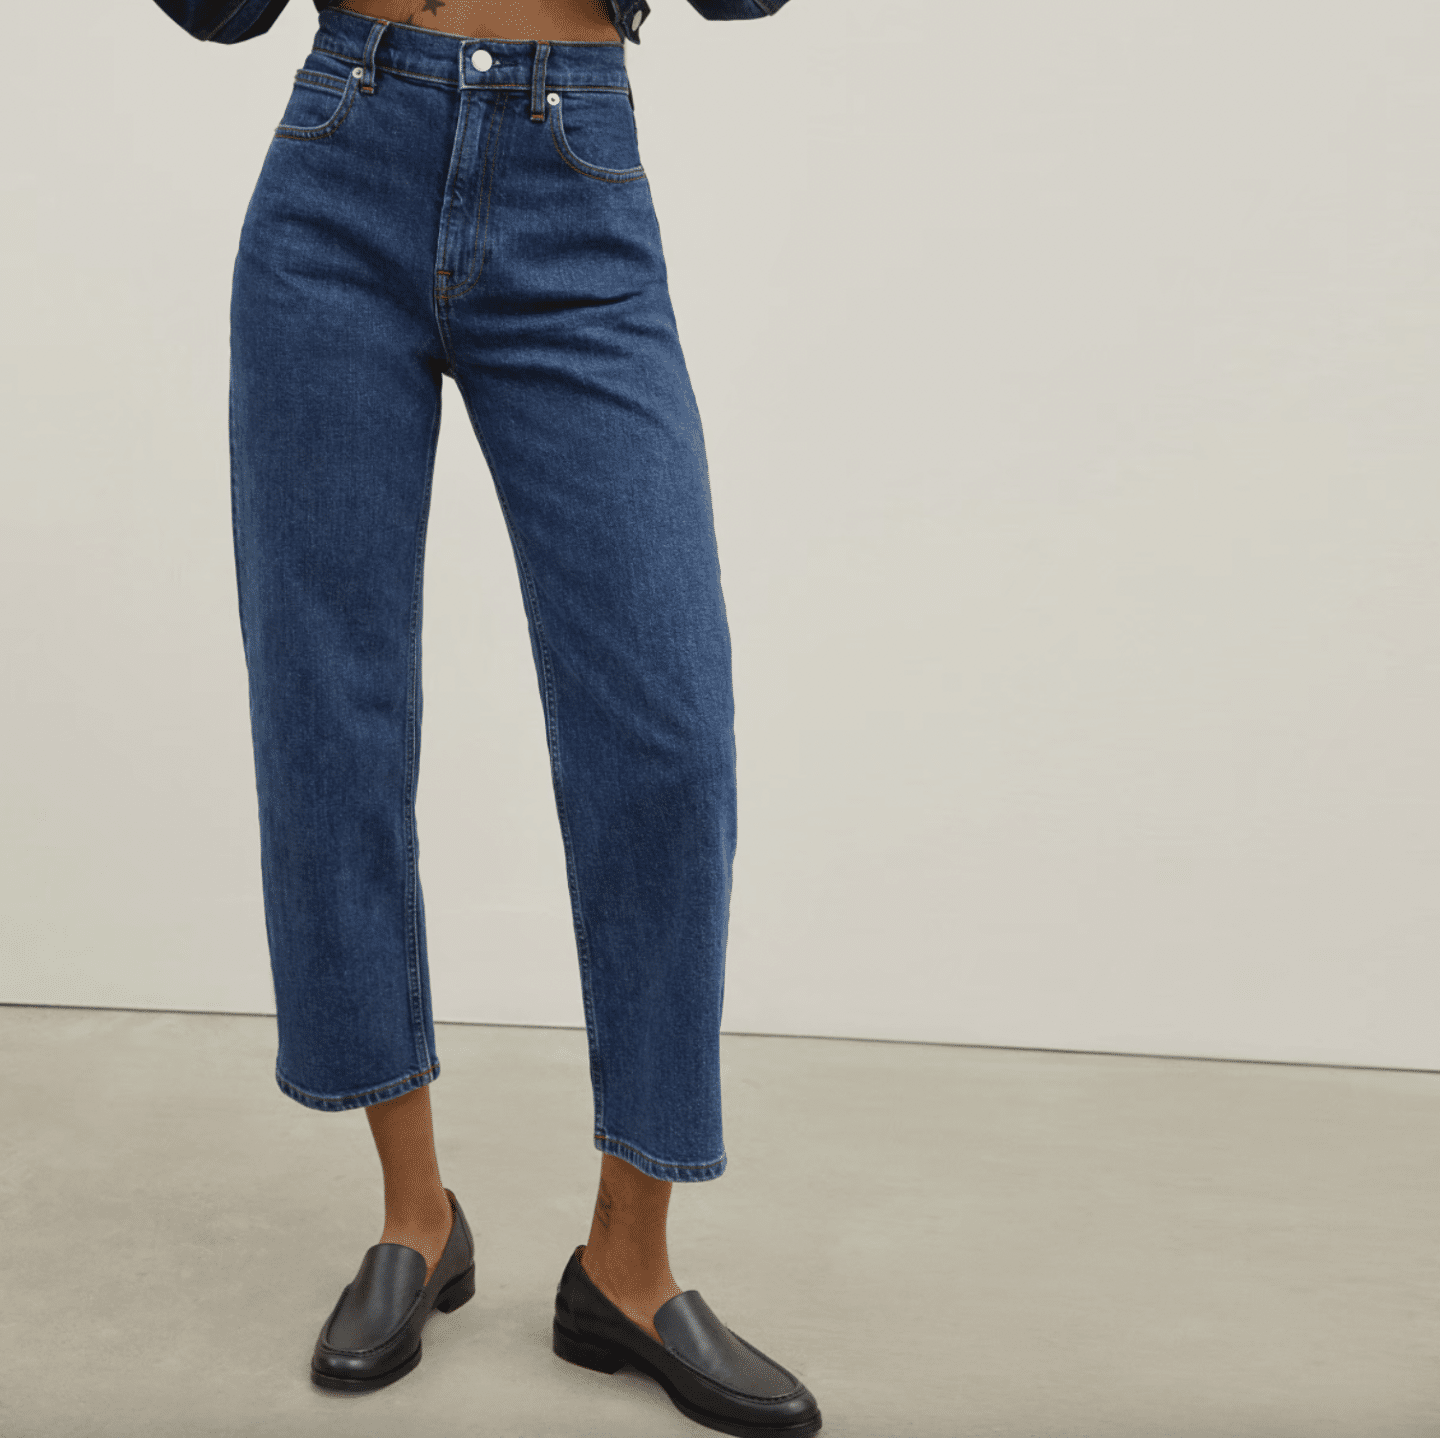 everlane denim review, by Blogger What The Fab